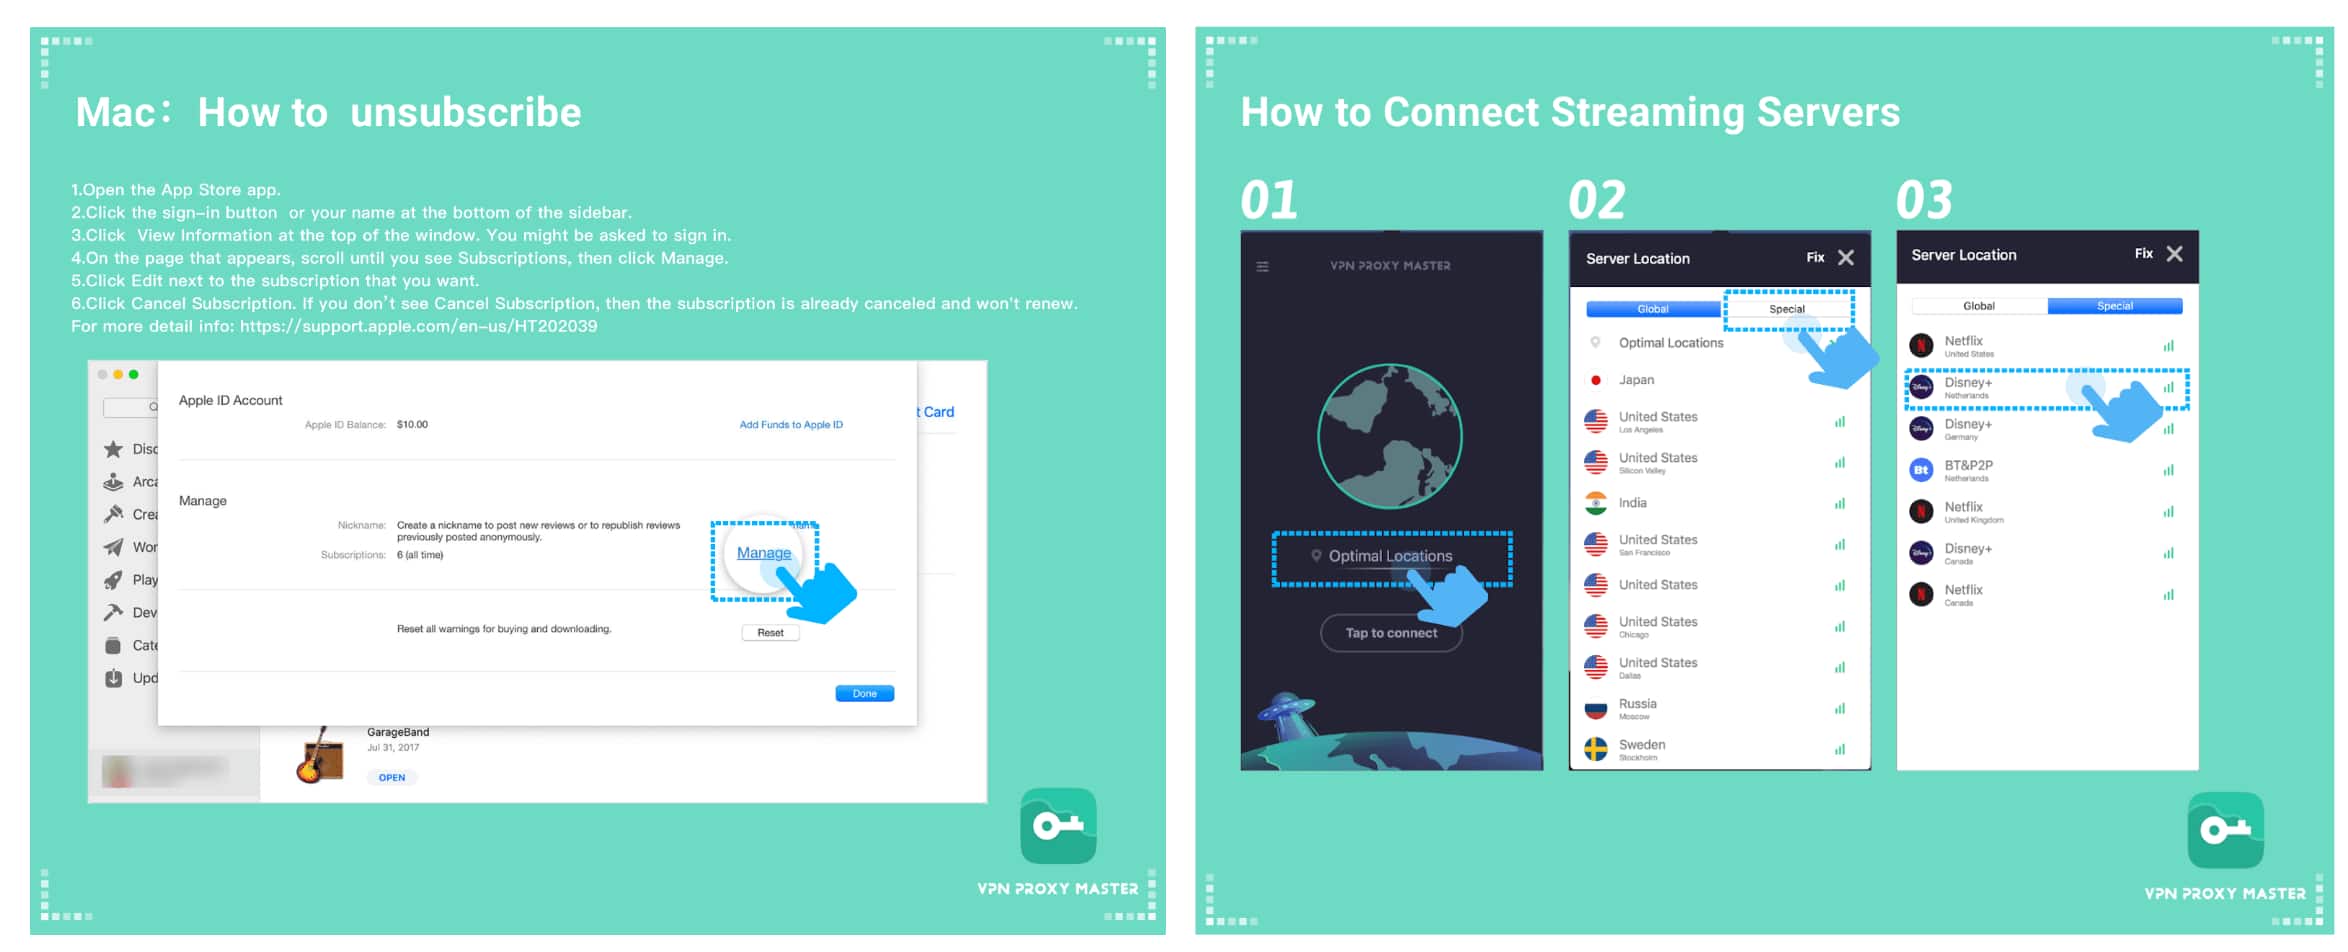 Screenshots of tutorial images provided by VPN Proxy Master.